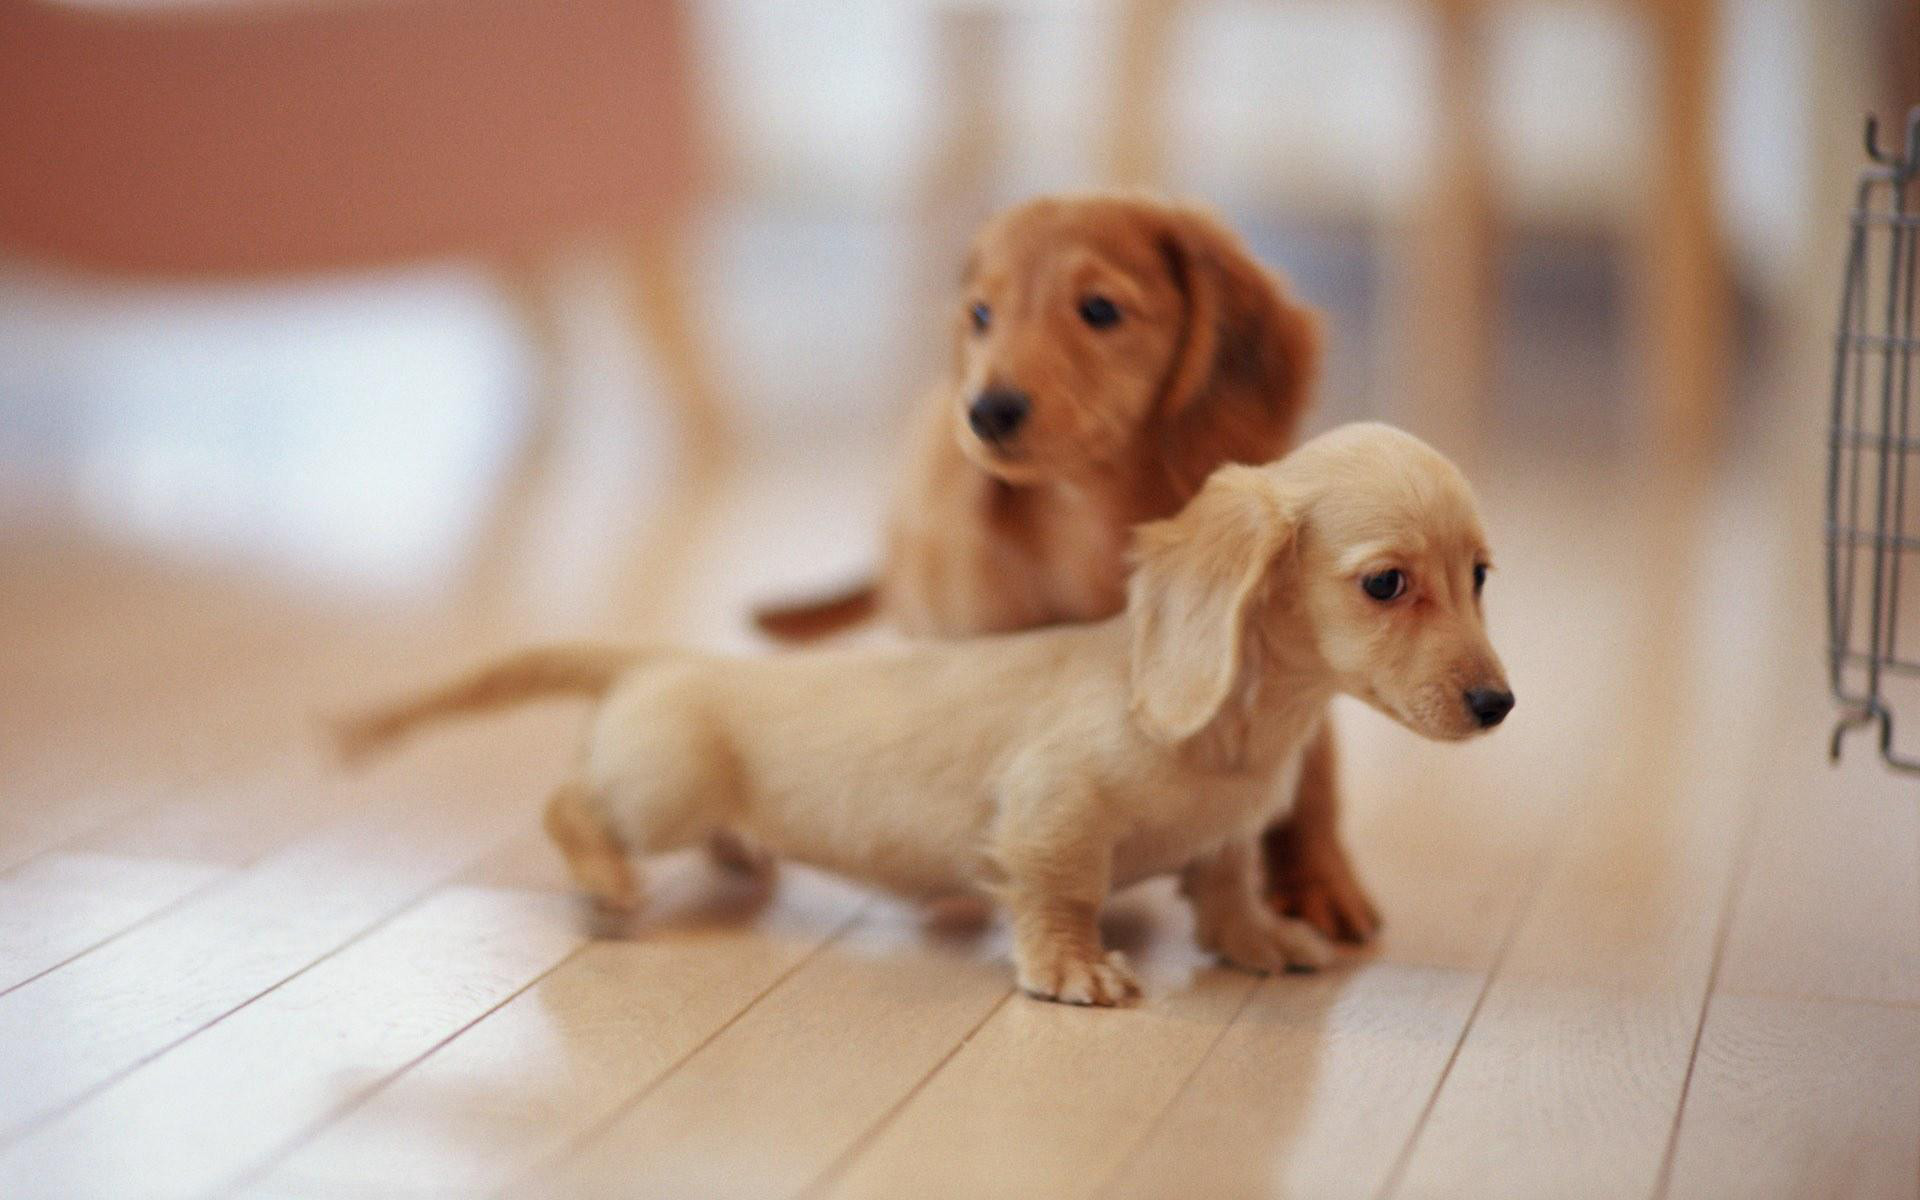 1920x1200 3D Cute Puppies Wallpaper Images. Dogs, Cute Puppies, Cute Pupy, Cute .